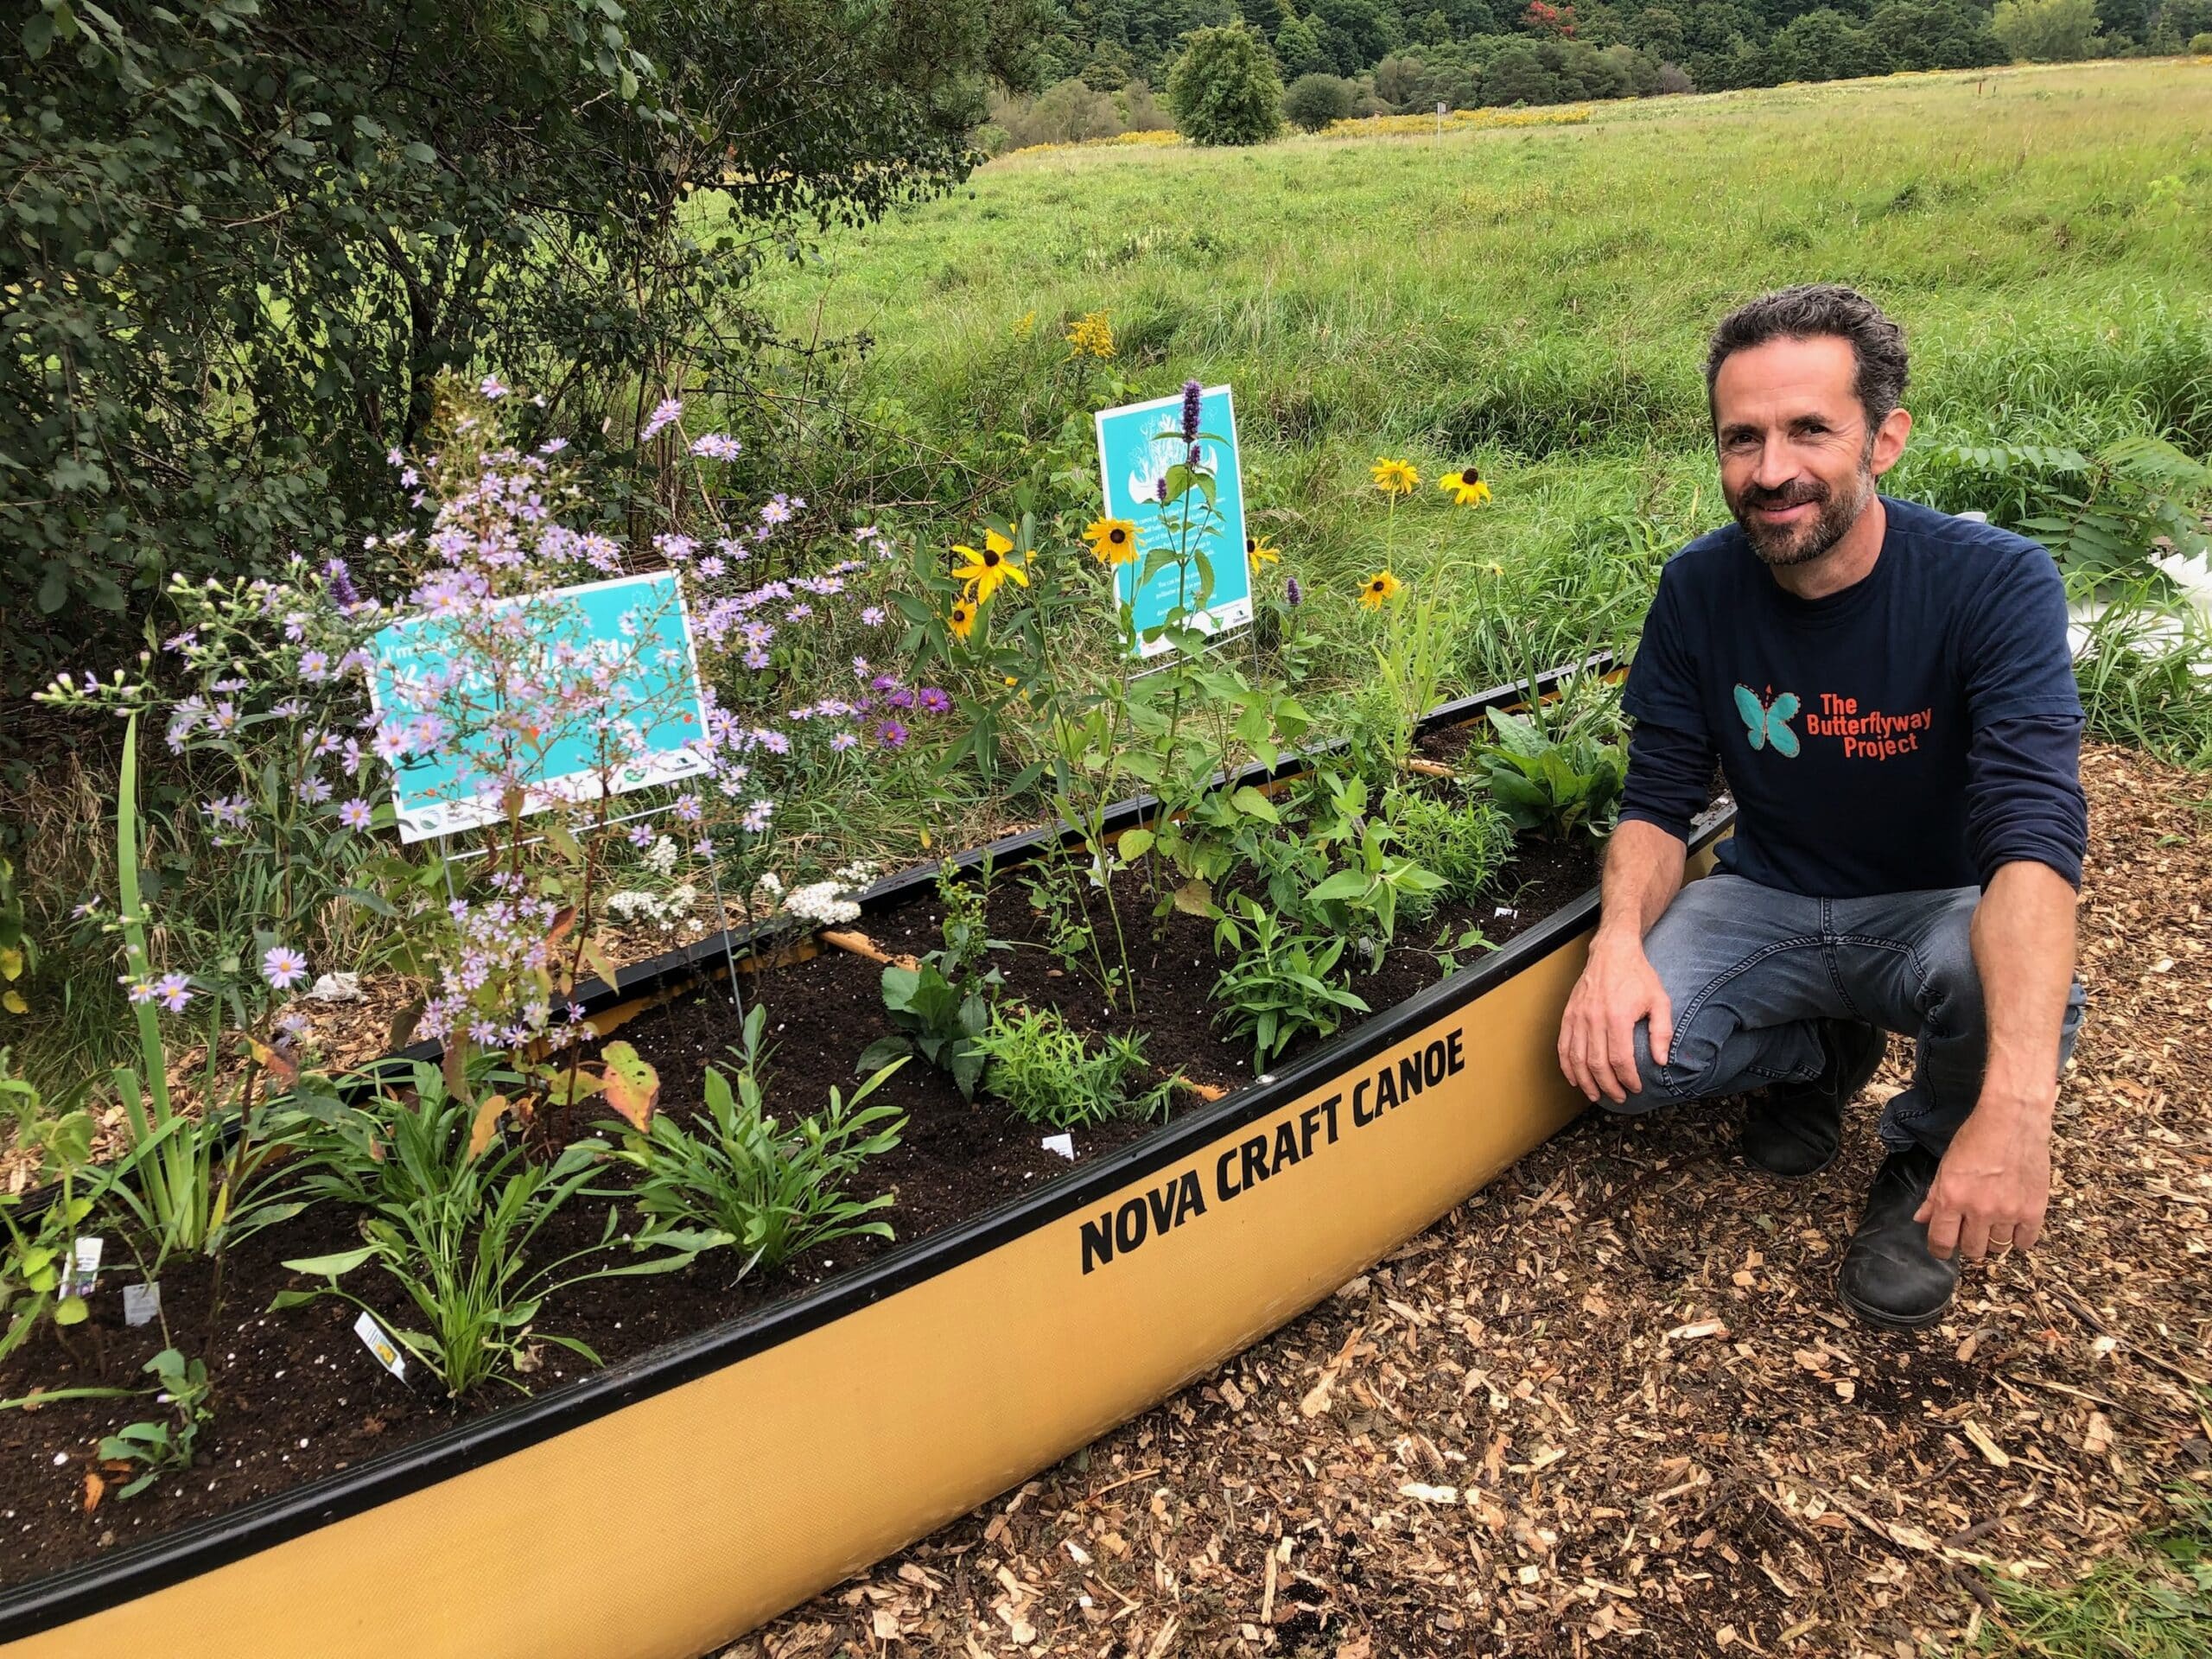 Man crouches in front of canoe filled with pollinator plants